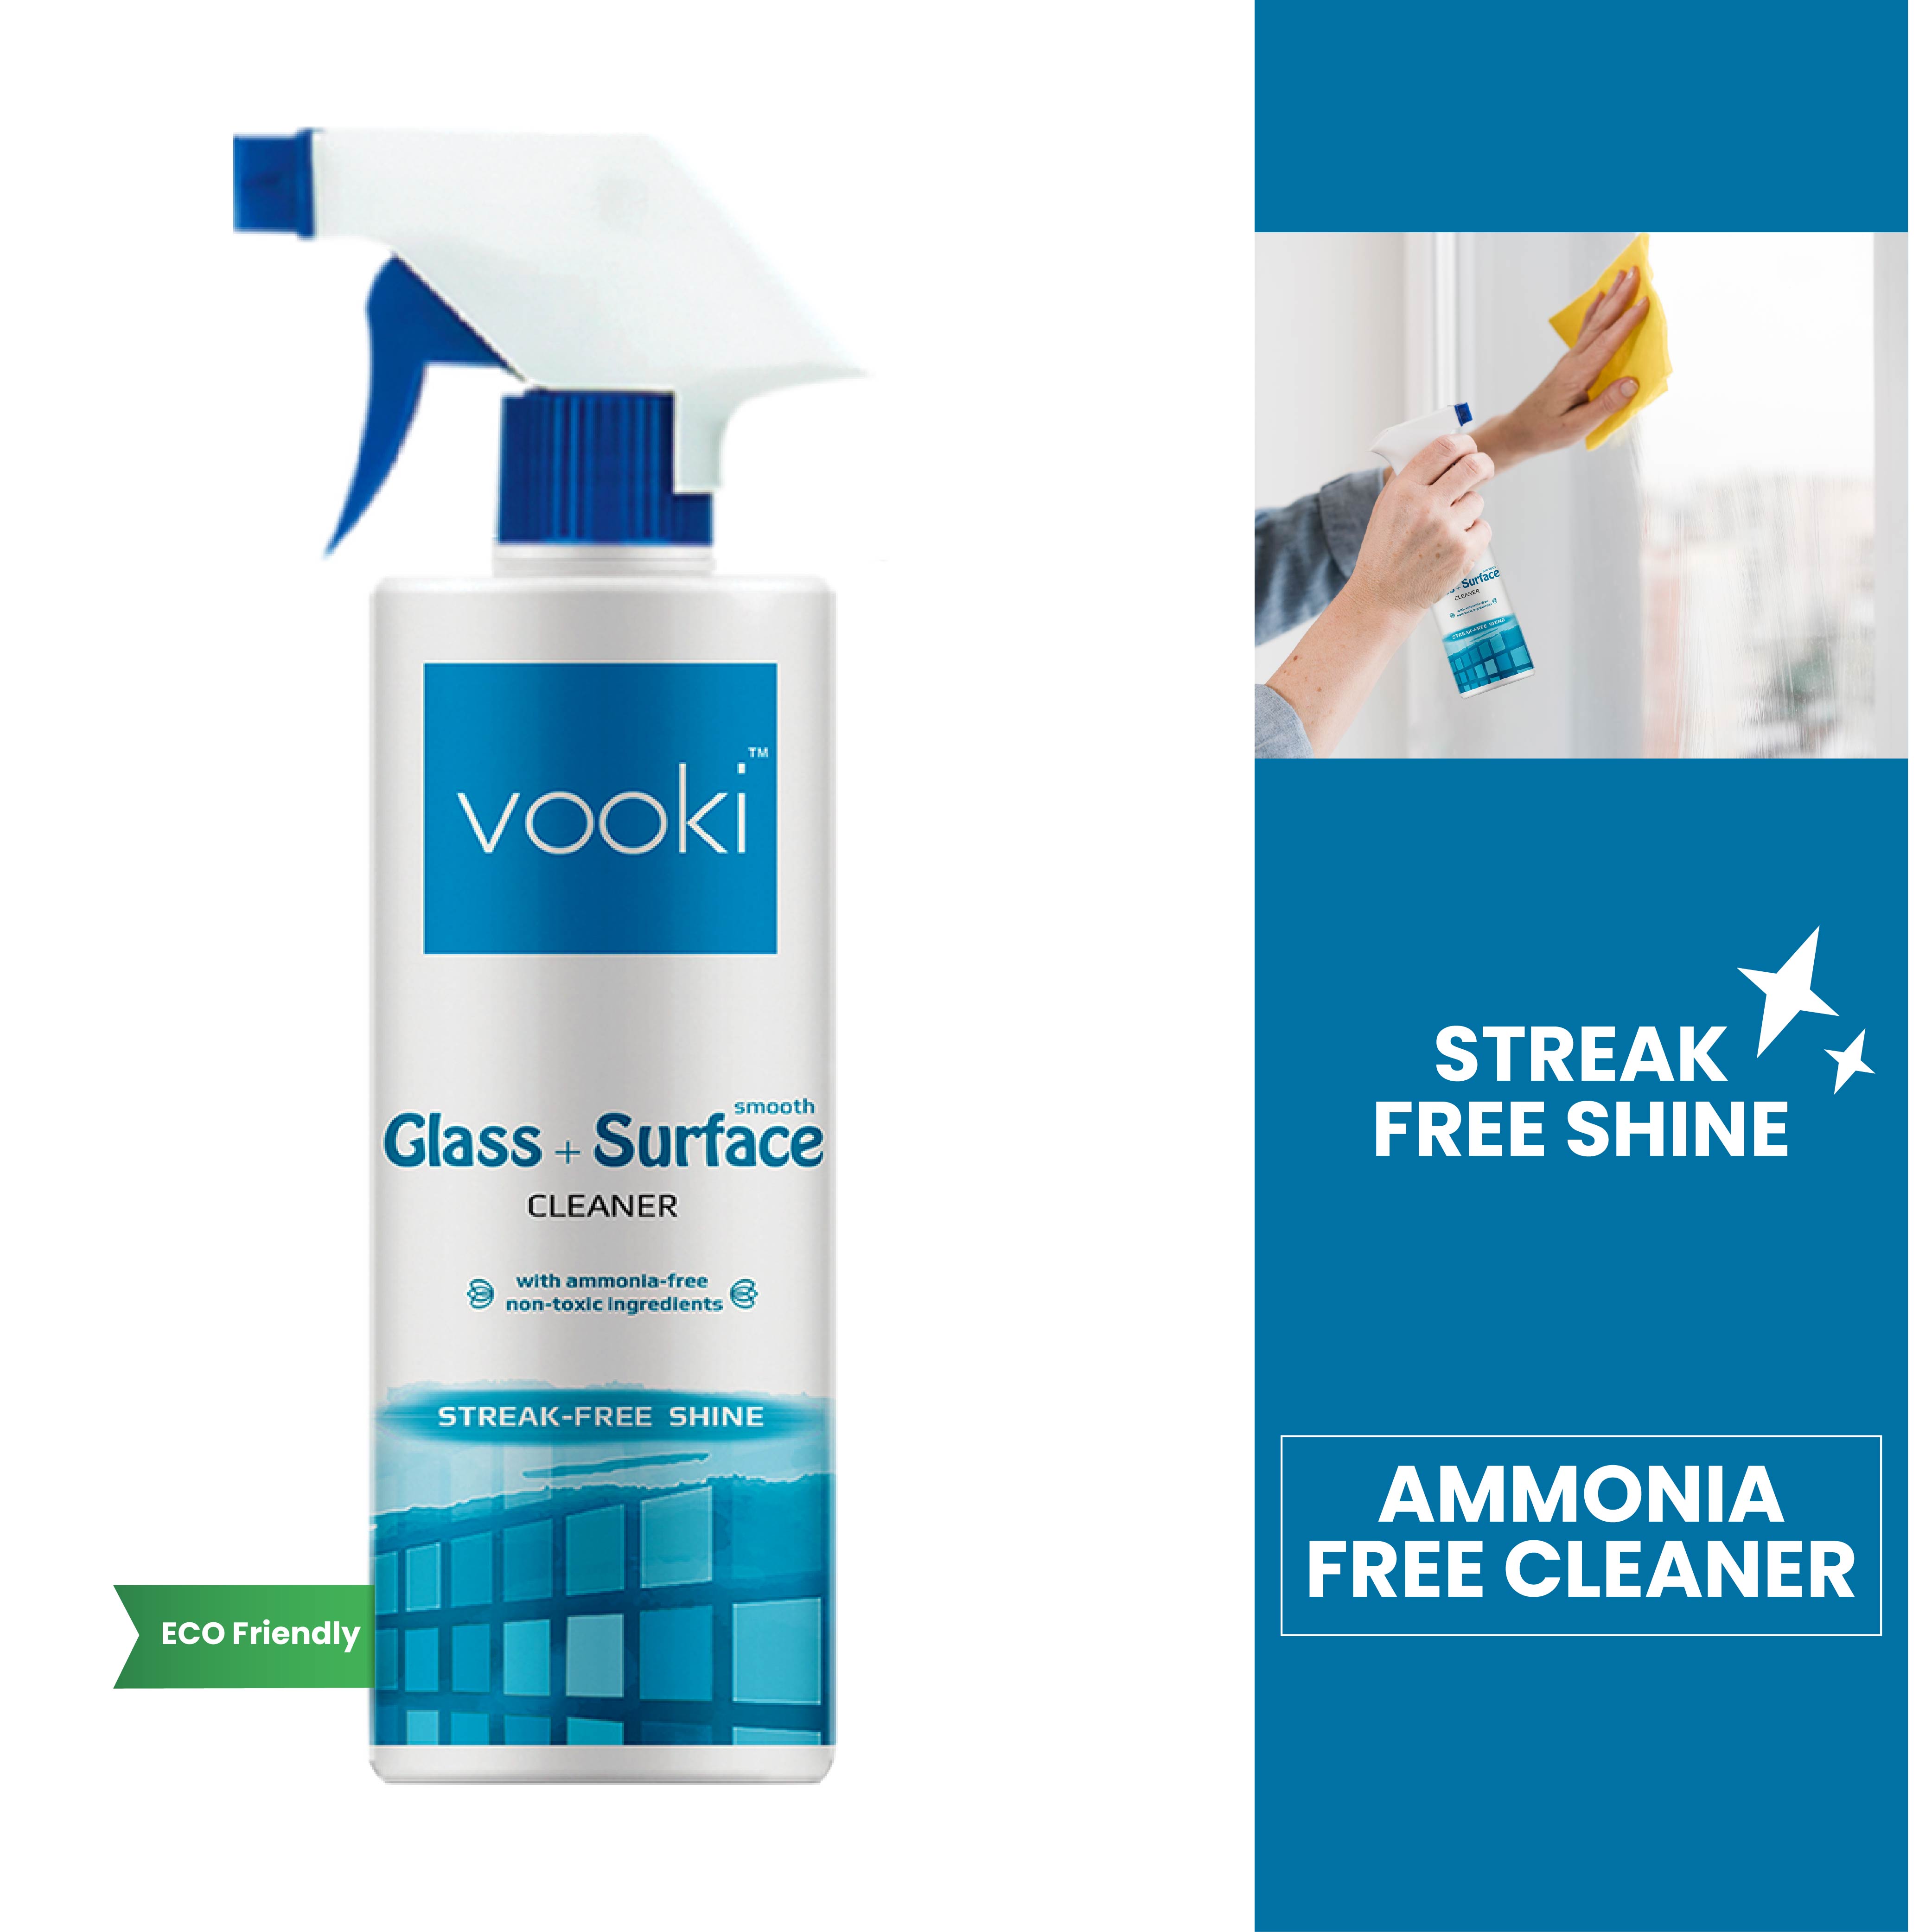 A bottle of ammonia-free cleaner for glass surfaces, providing a streak-free shine and effective cleaning power.